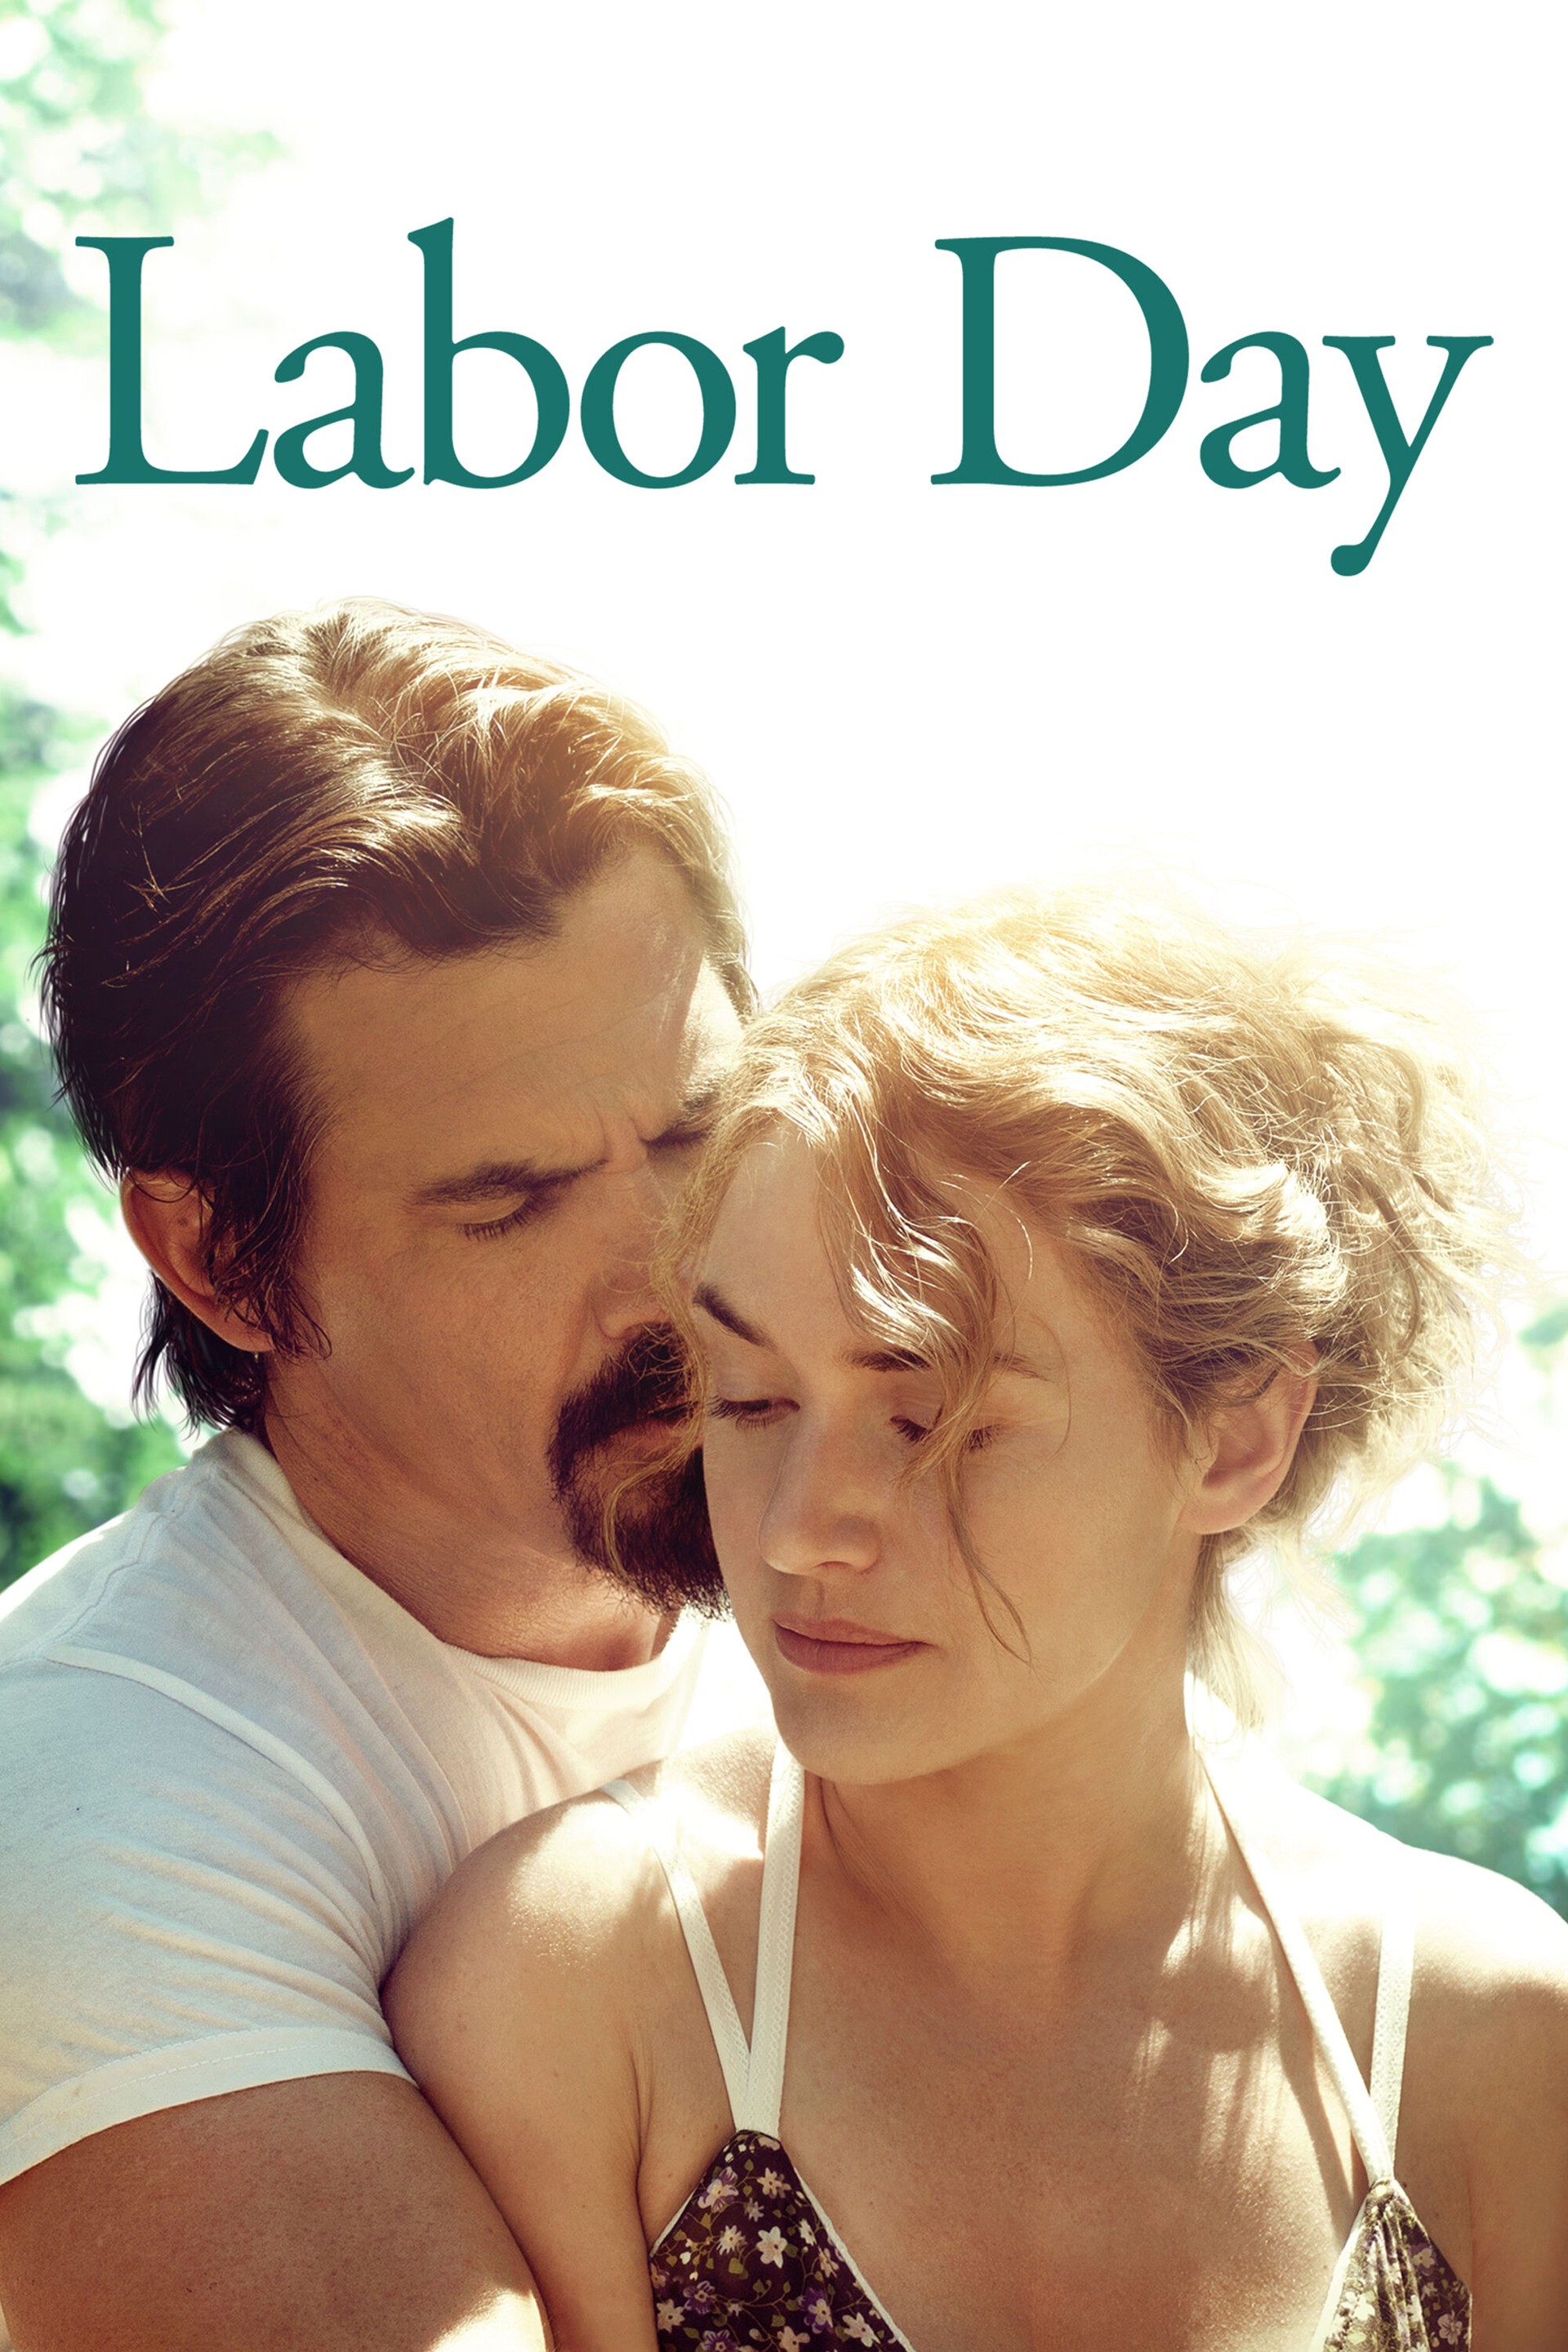 Have we forgotten the true meaning of Labor Day?